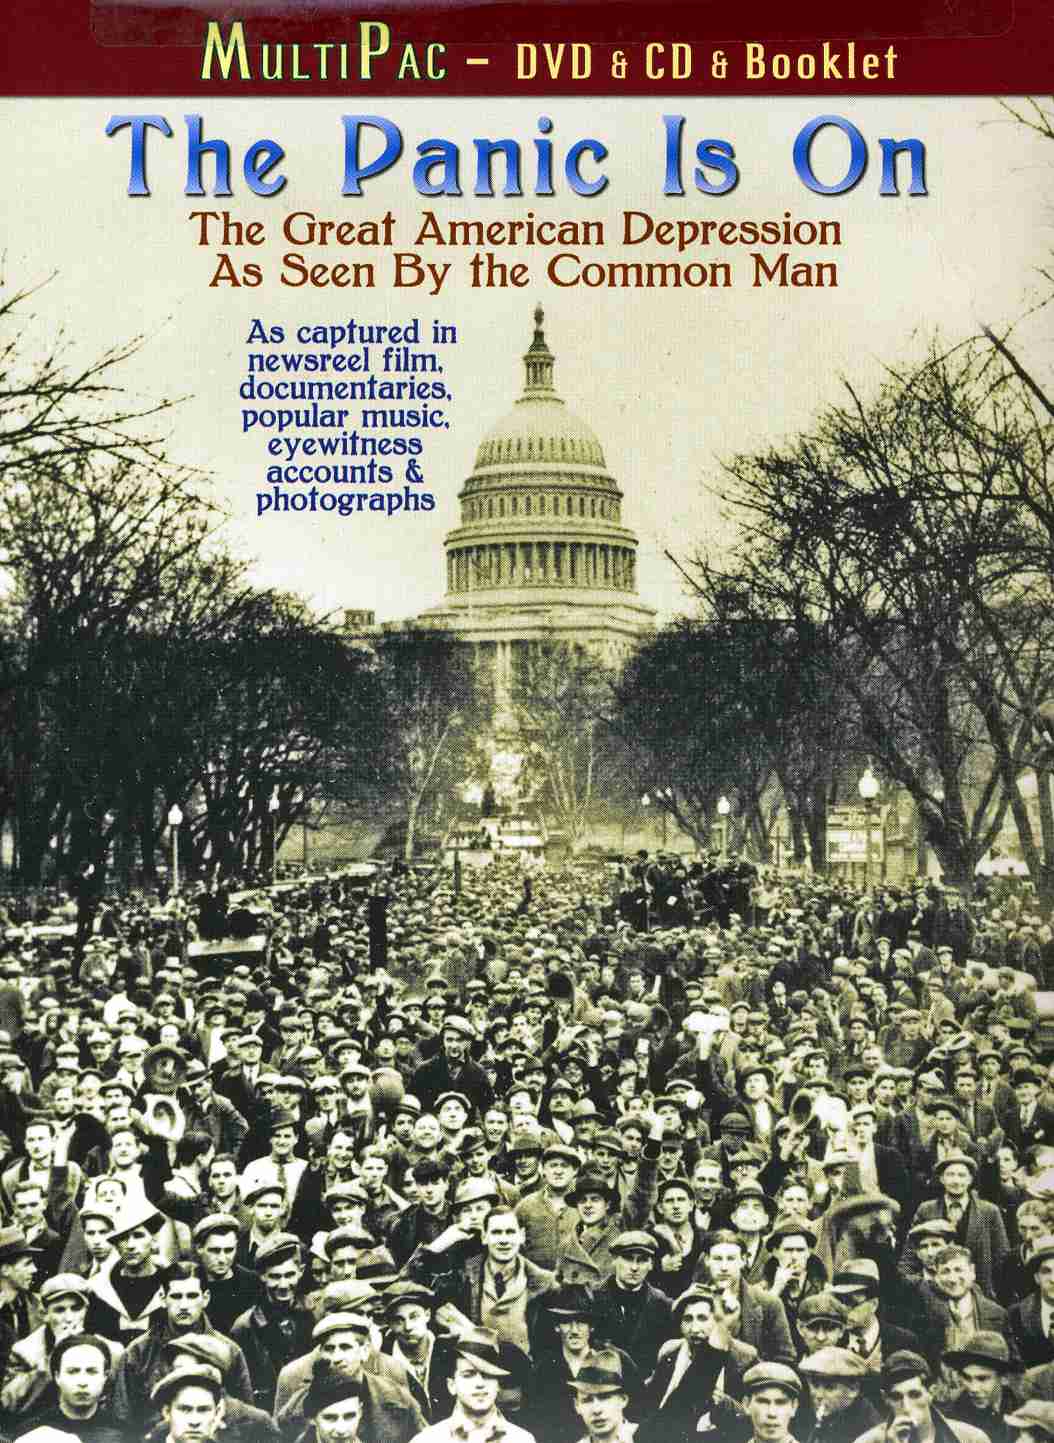 PANIC IS ON: GREAT AMERICAN DEPRESSION AS SEEN BY